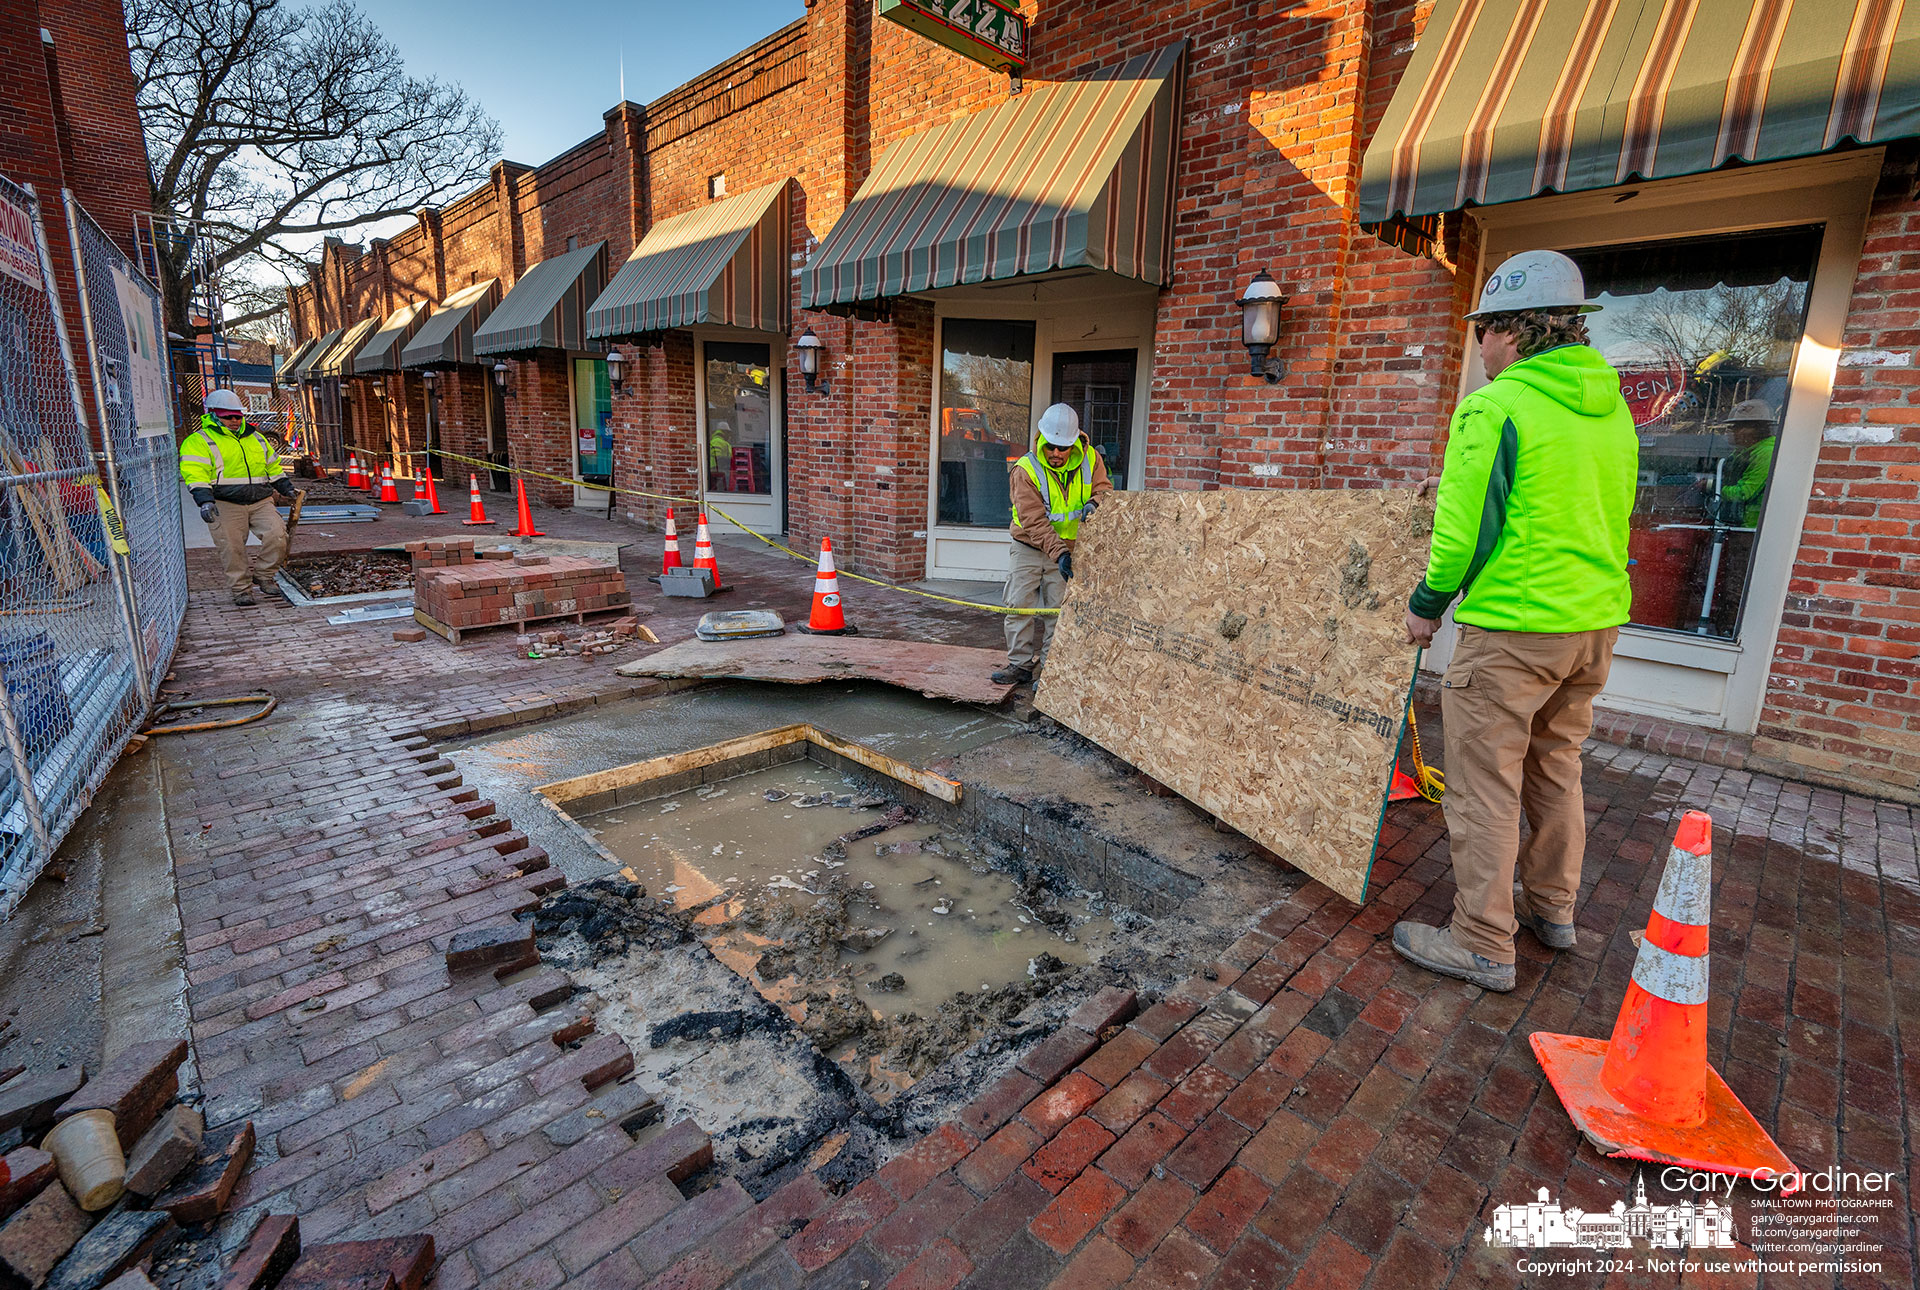 Workers cover freshly poured concrete designed to be platforms for grating surrounding trees to be planted in the Brick Walk between Java Central and High Bank Distillery. My Final Photo for February 29, 2024.